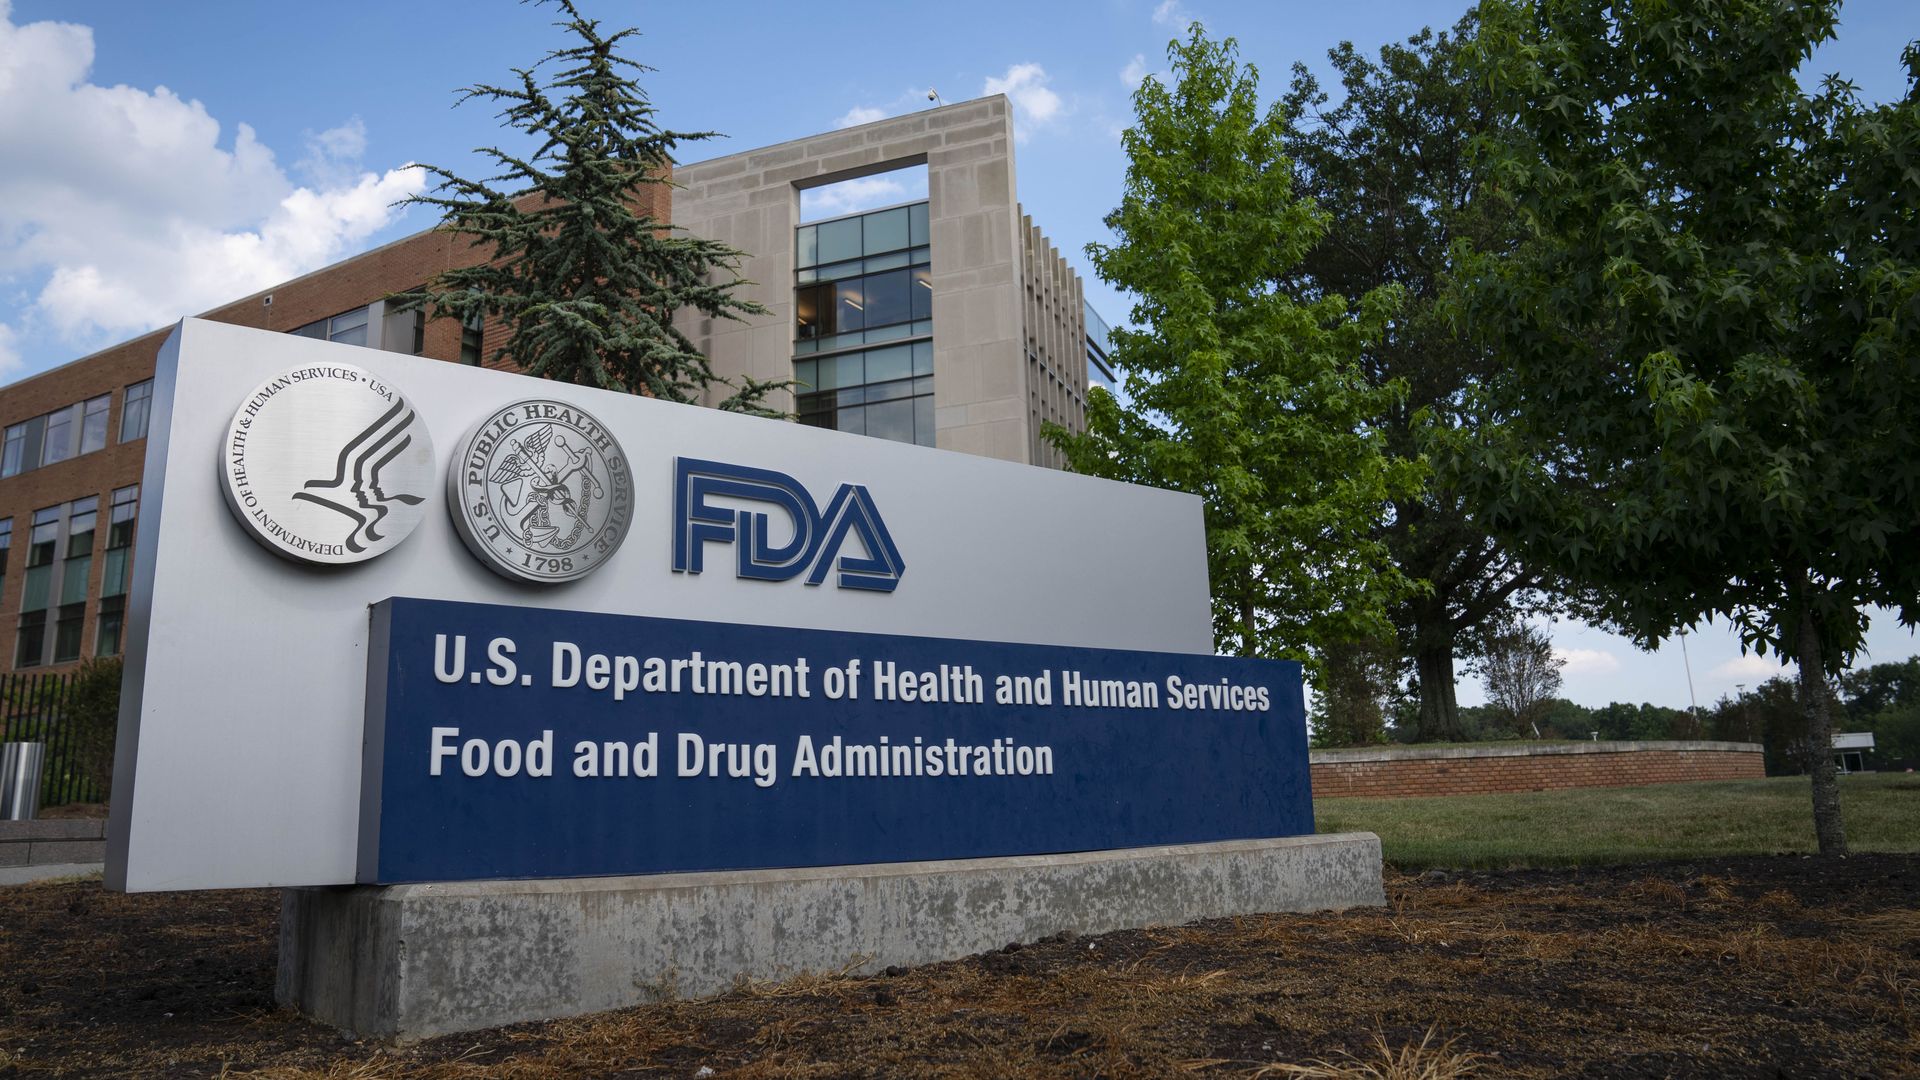 The FDA headquarters sign in front of trees and the FDA building.